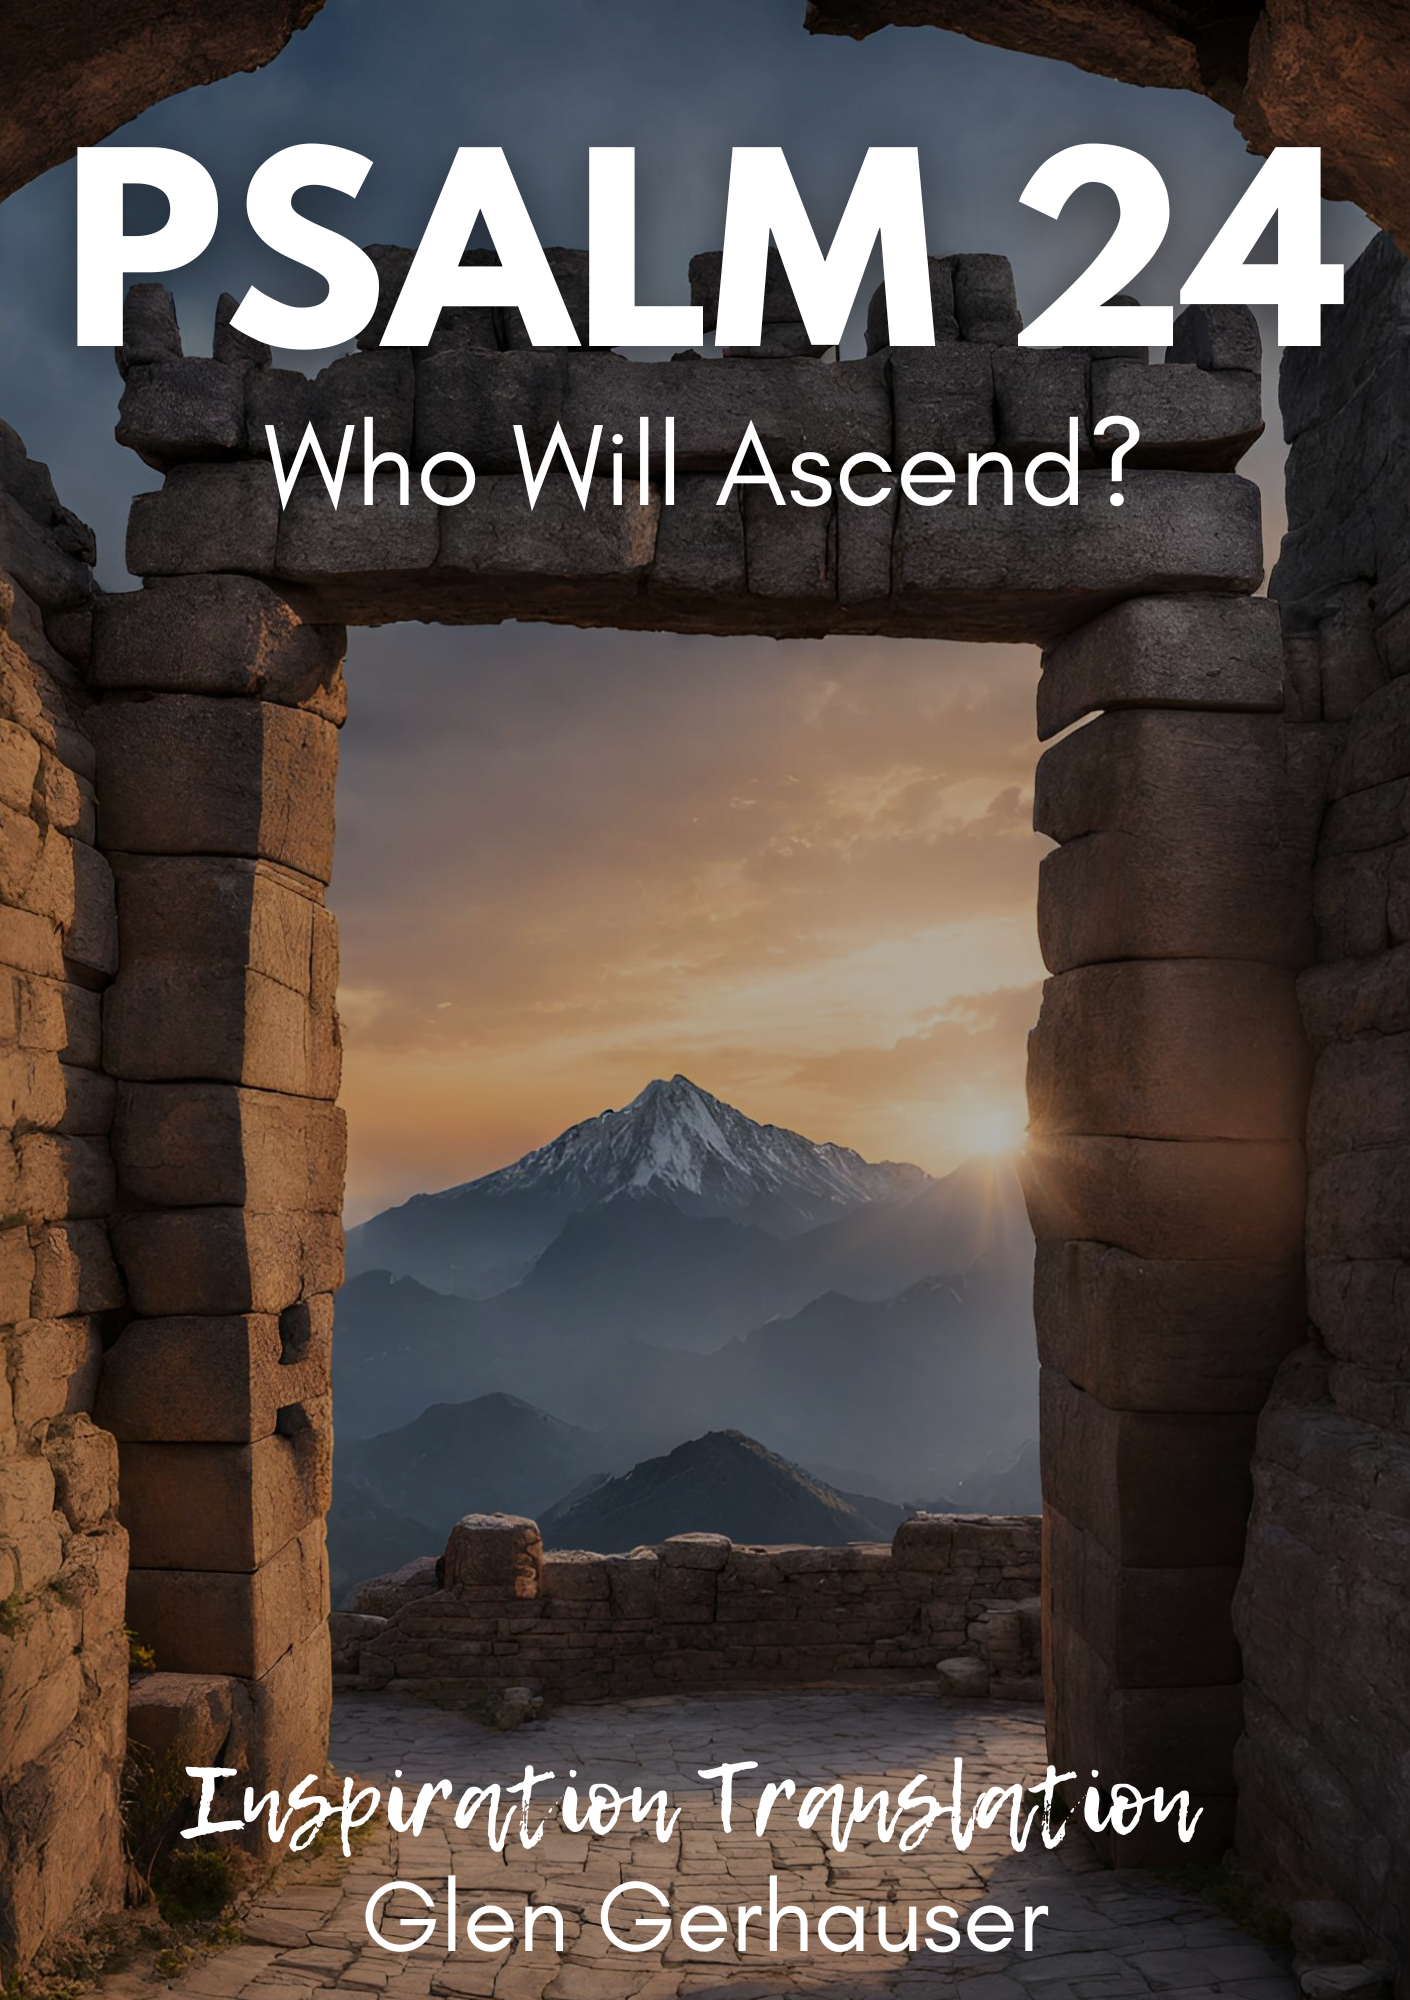 Psalm 24: Who Will Ascend? (Graphic Psalms Series)